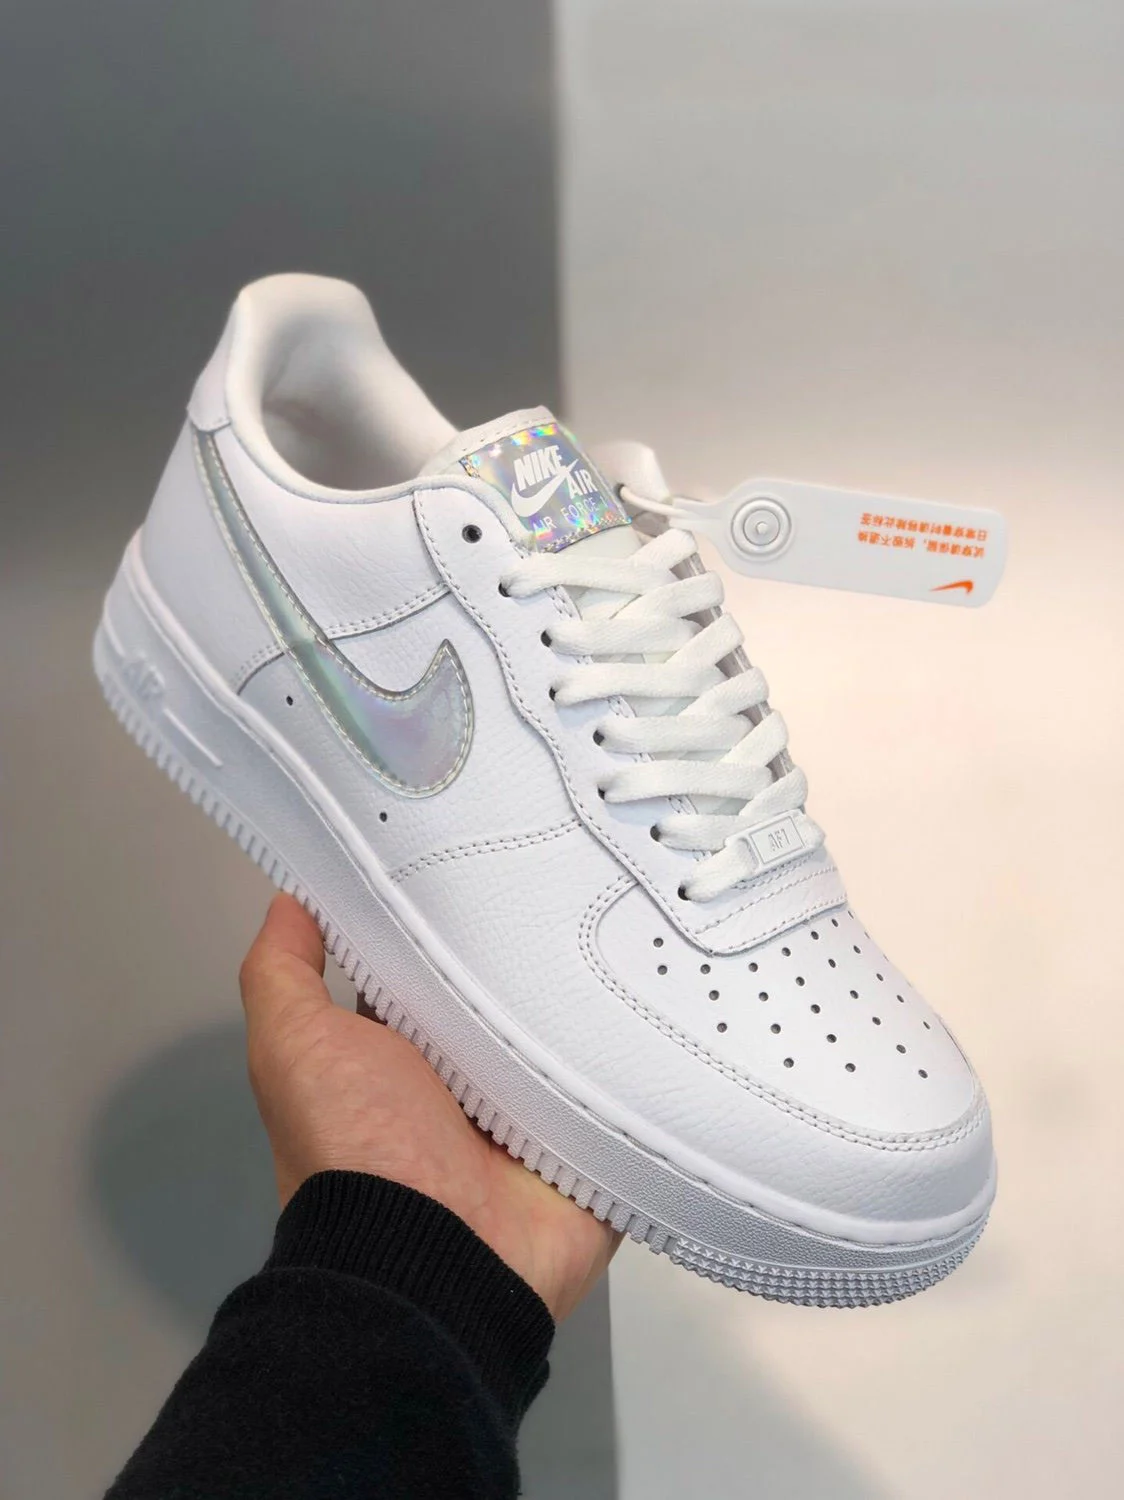 Nike Air Force 1 Low White Iridescent CJ1646-100 For Sale